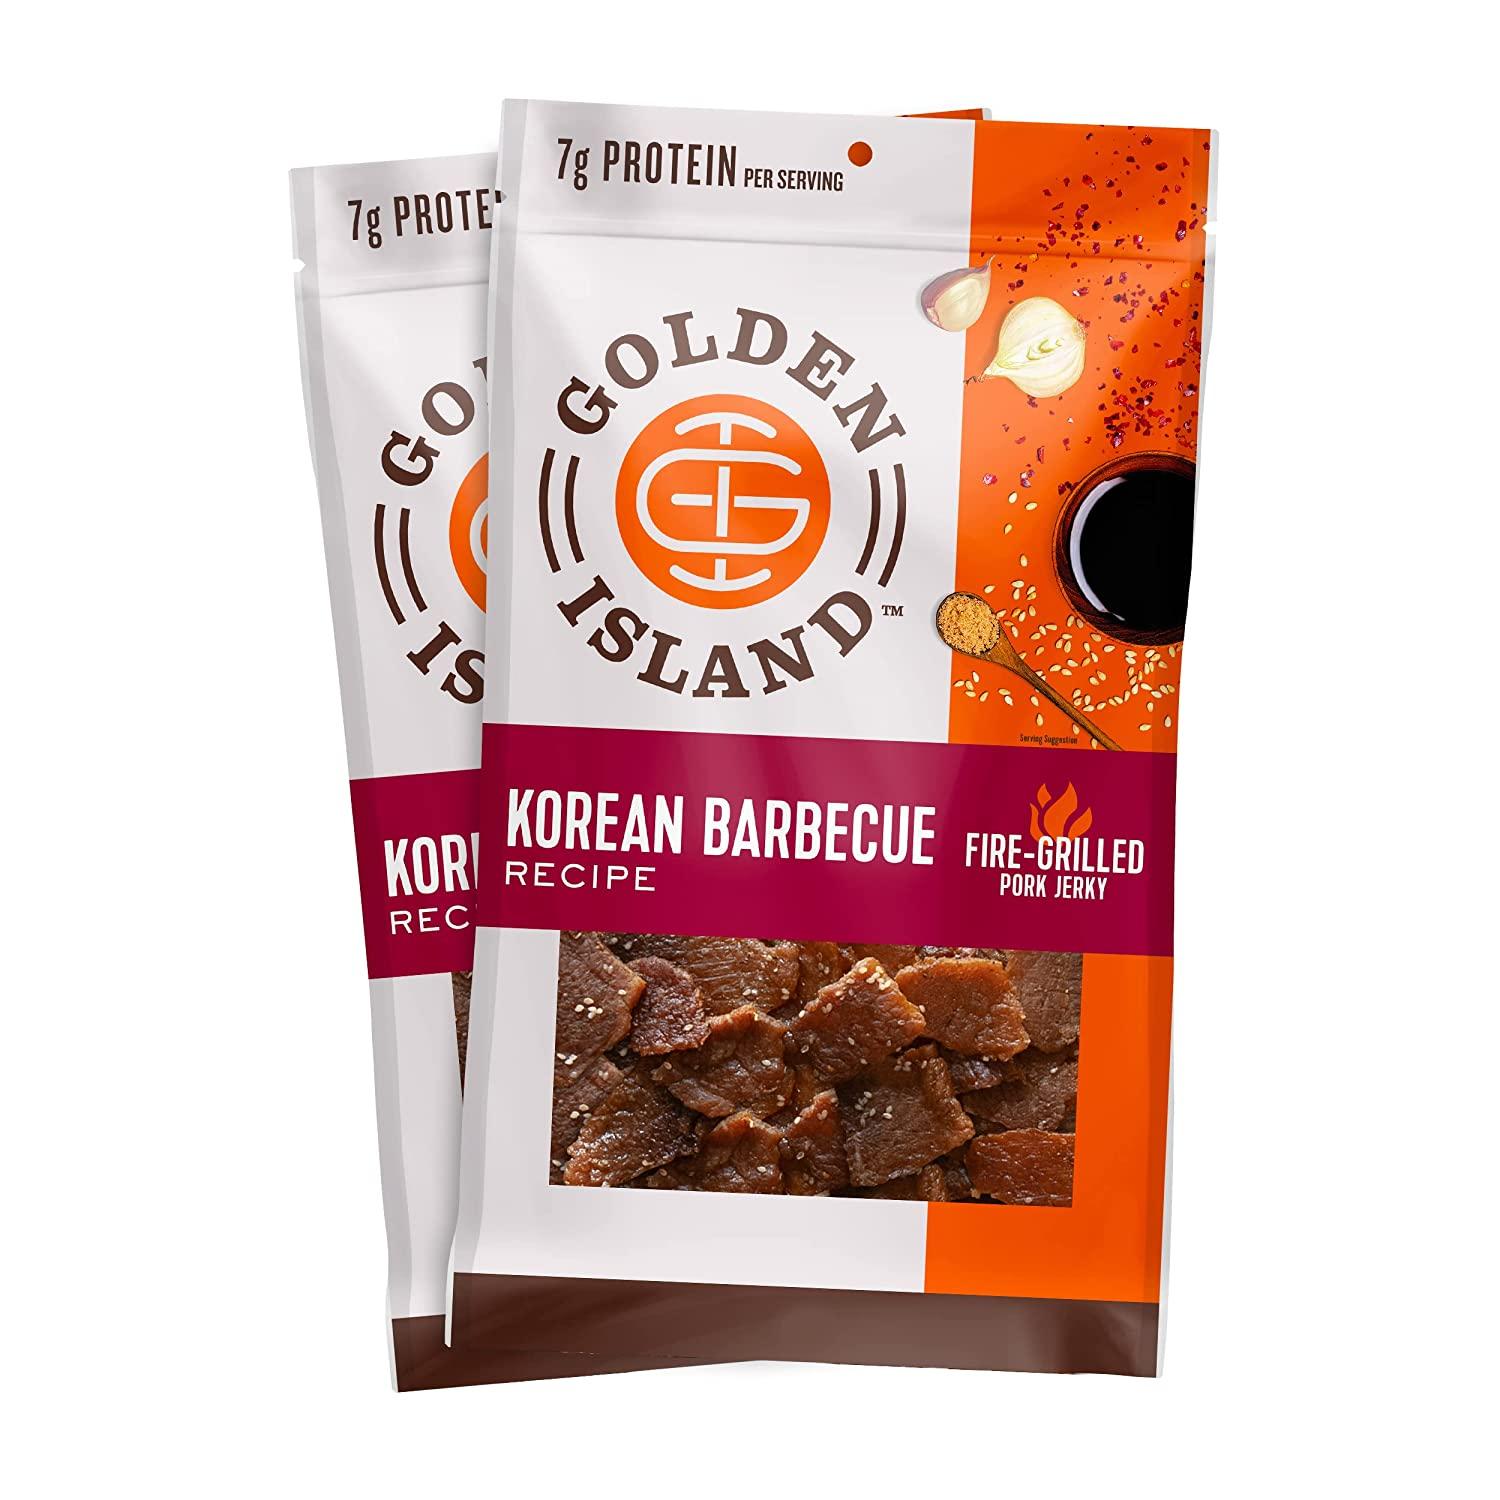 Golden Island Fire-Grilled Pork Jerky 2 Pack for $16.74 Shipped